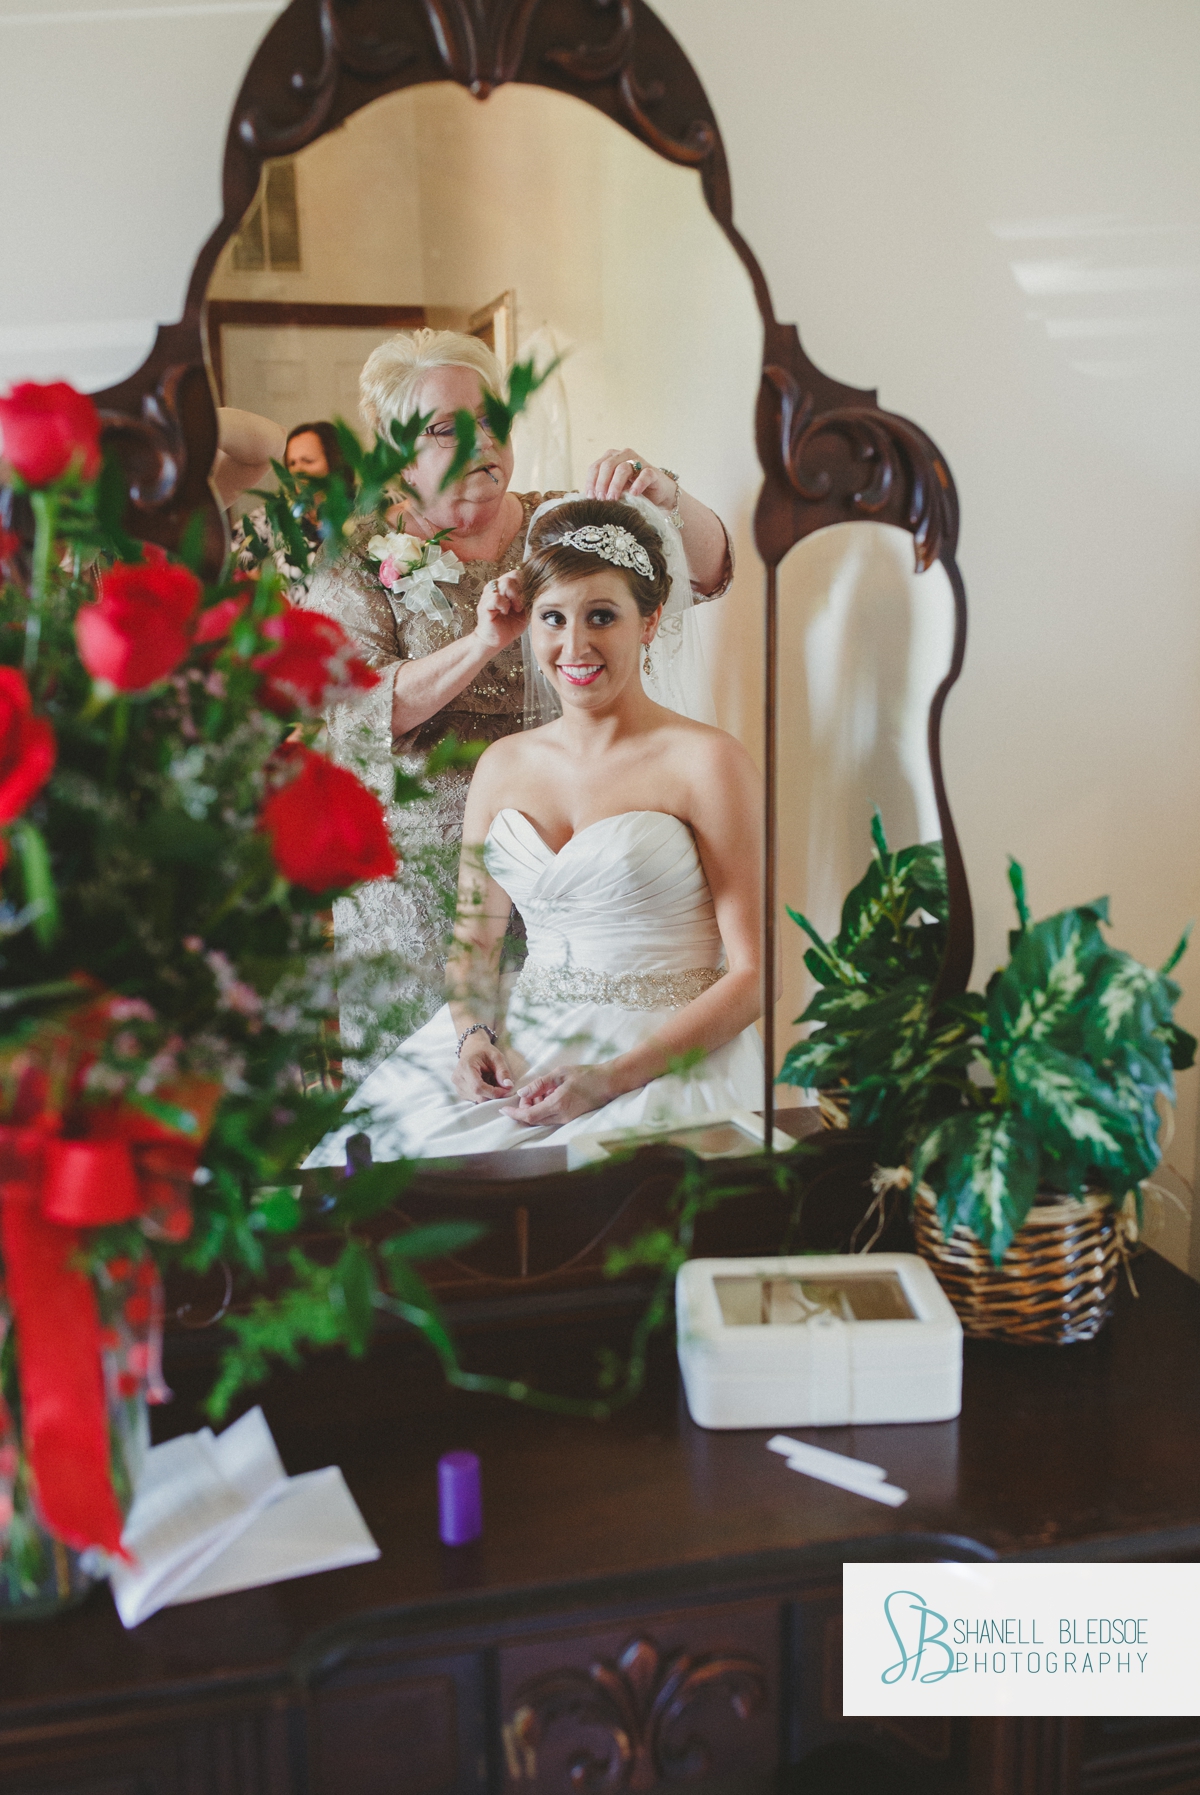 mother putting veil in bride's hair, vintage mirror reflection